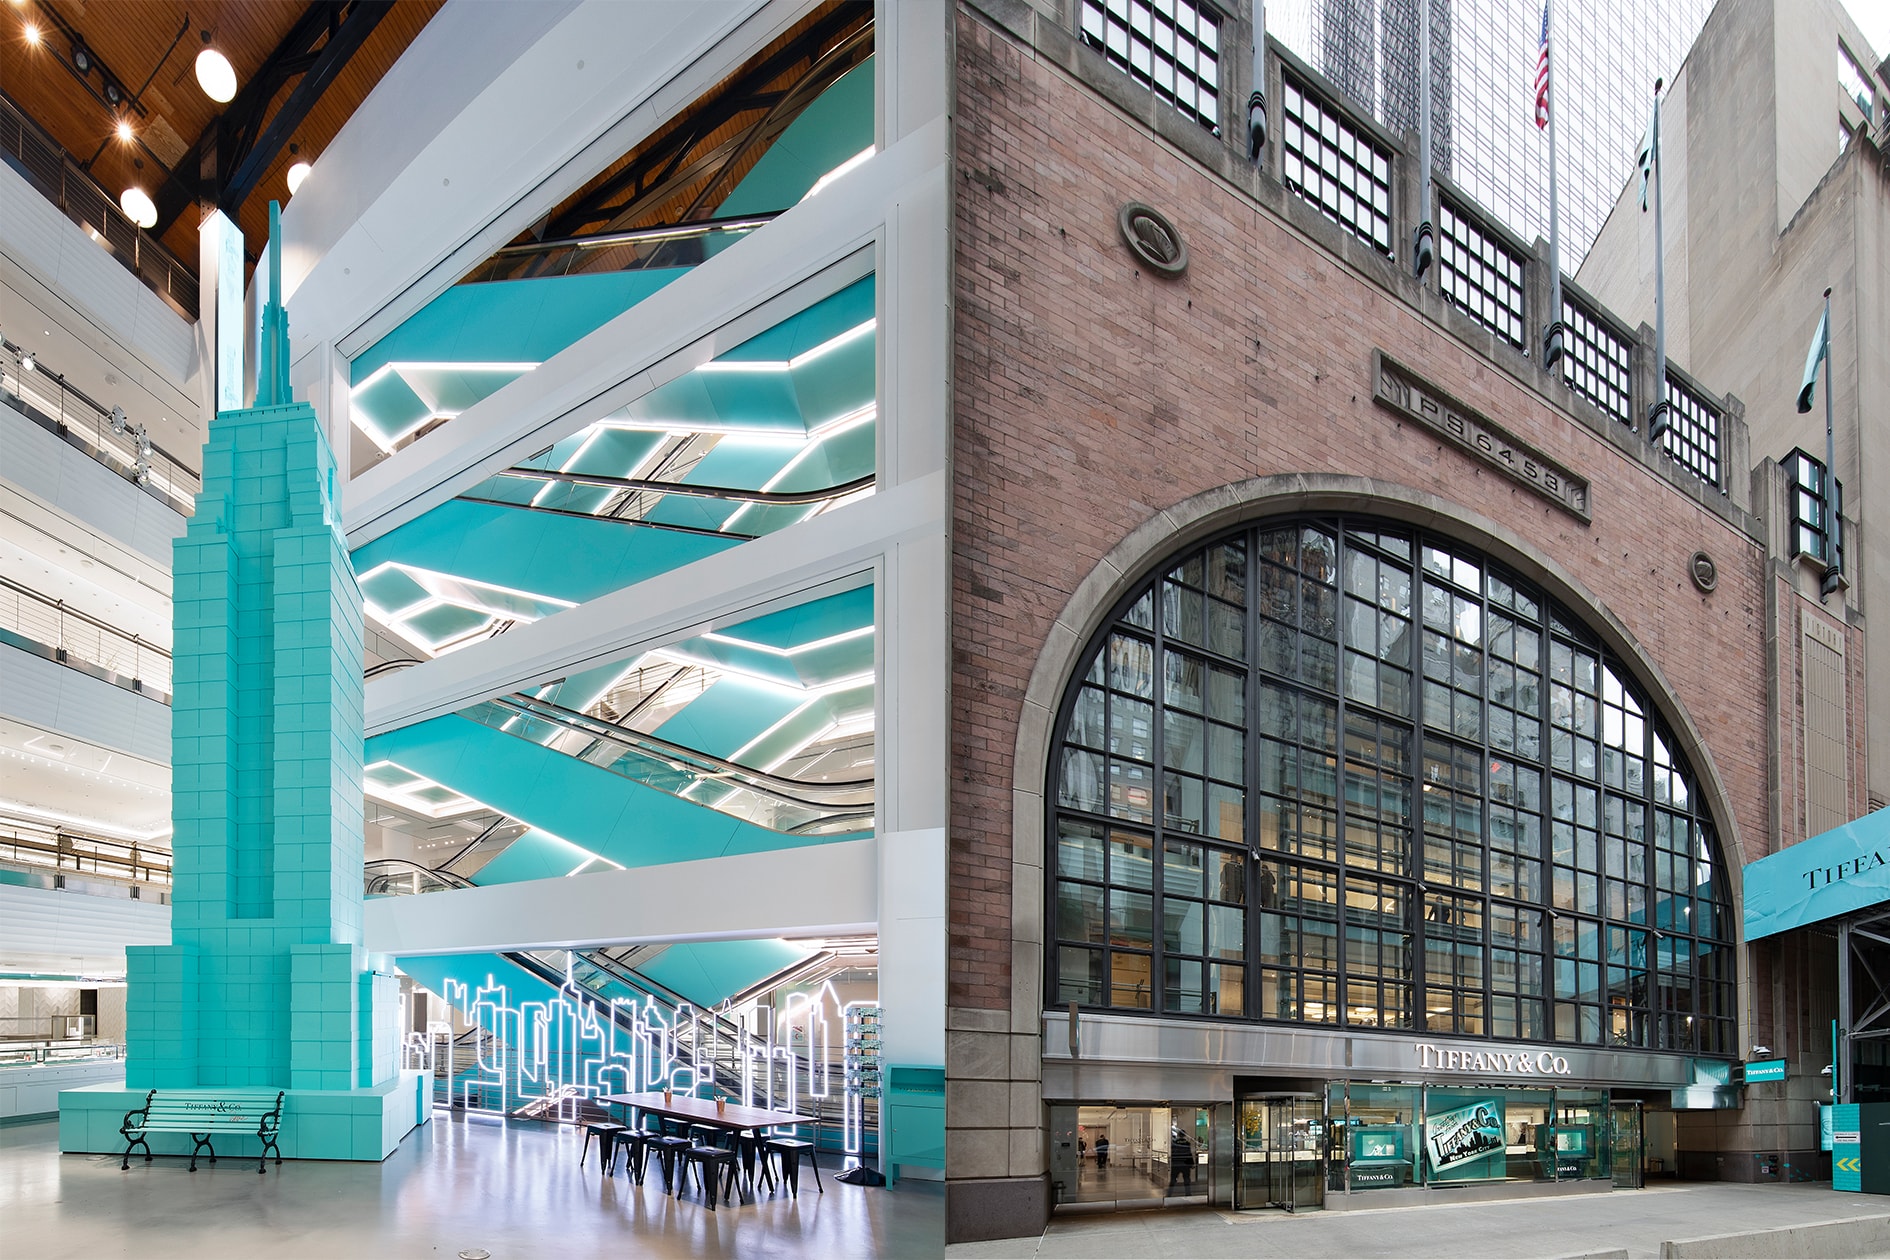 Inside the iconic Tiffany & Co Jewelry Store in New York City